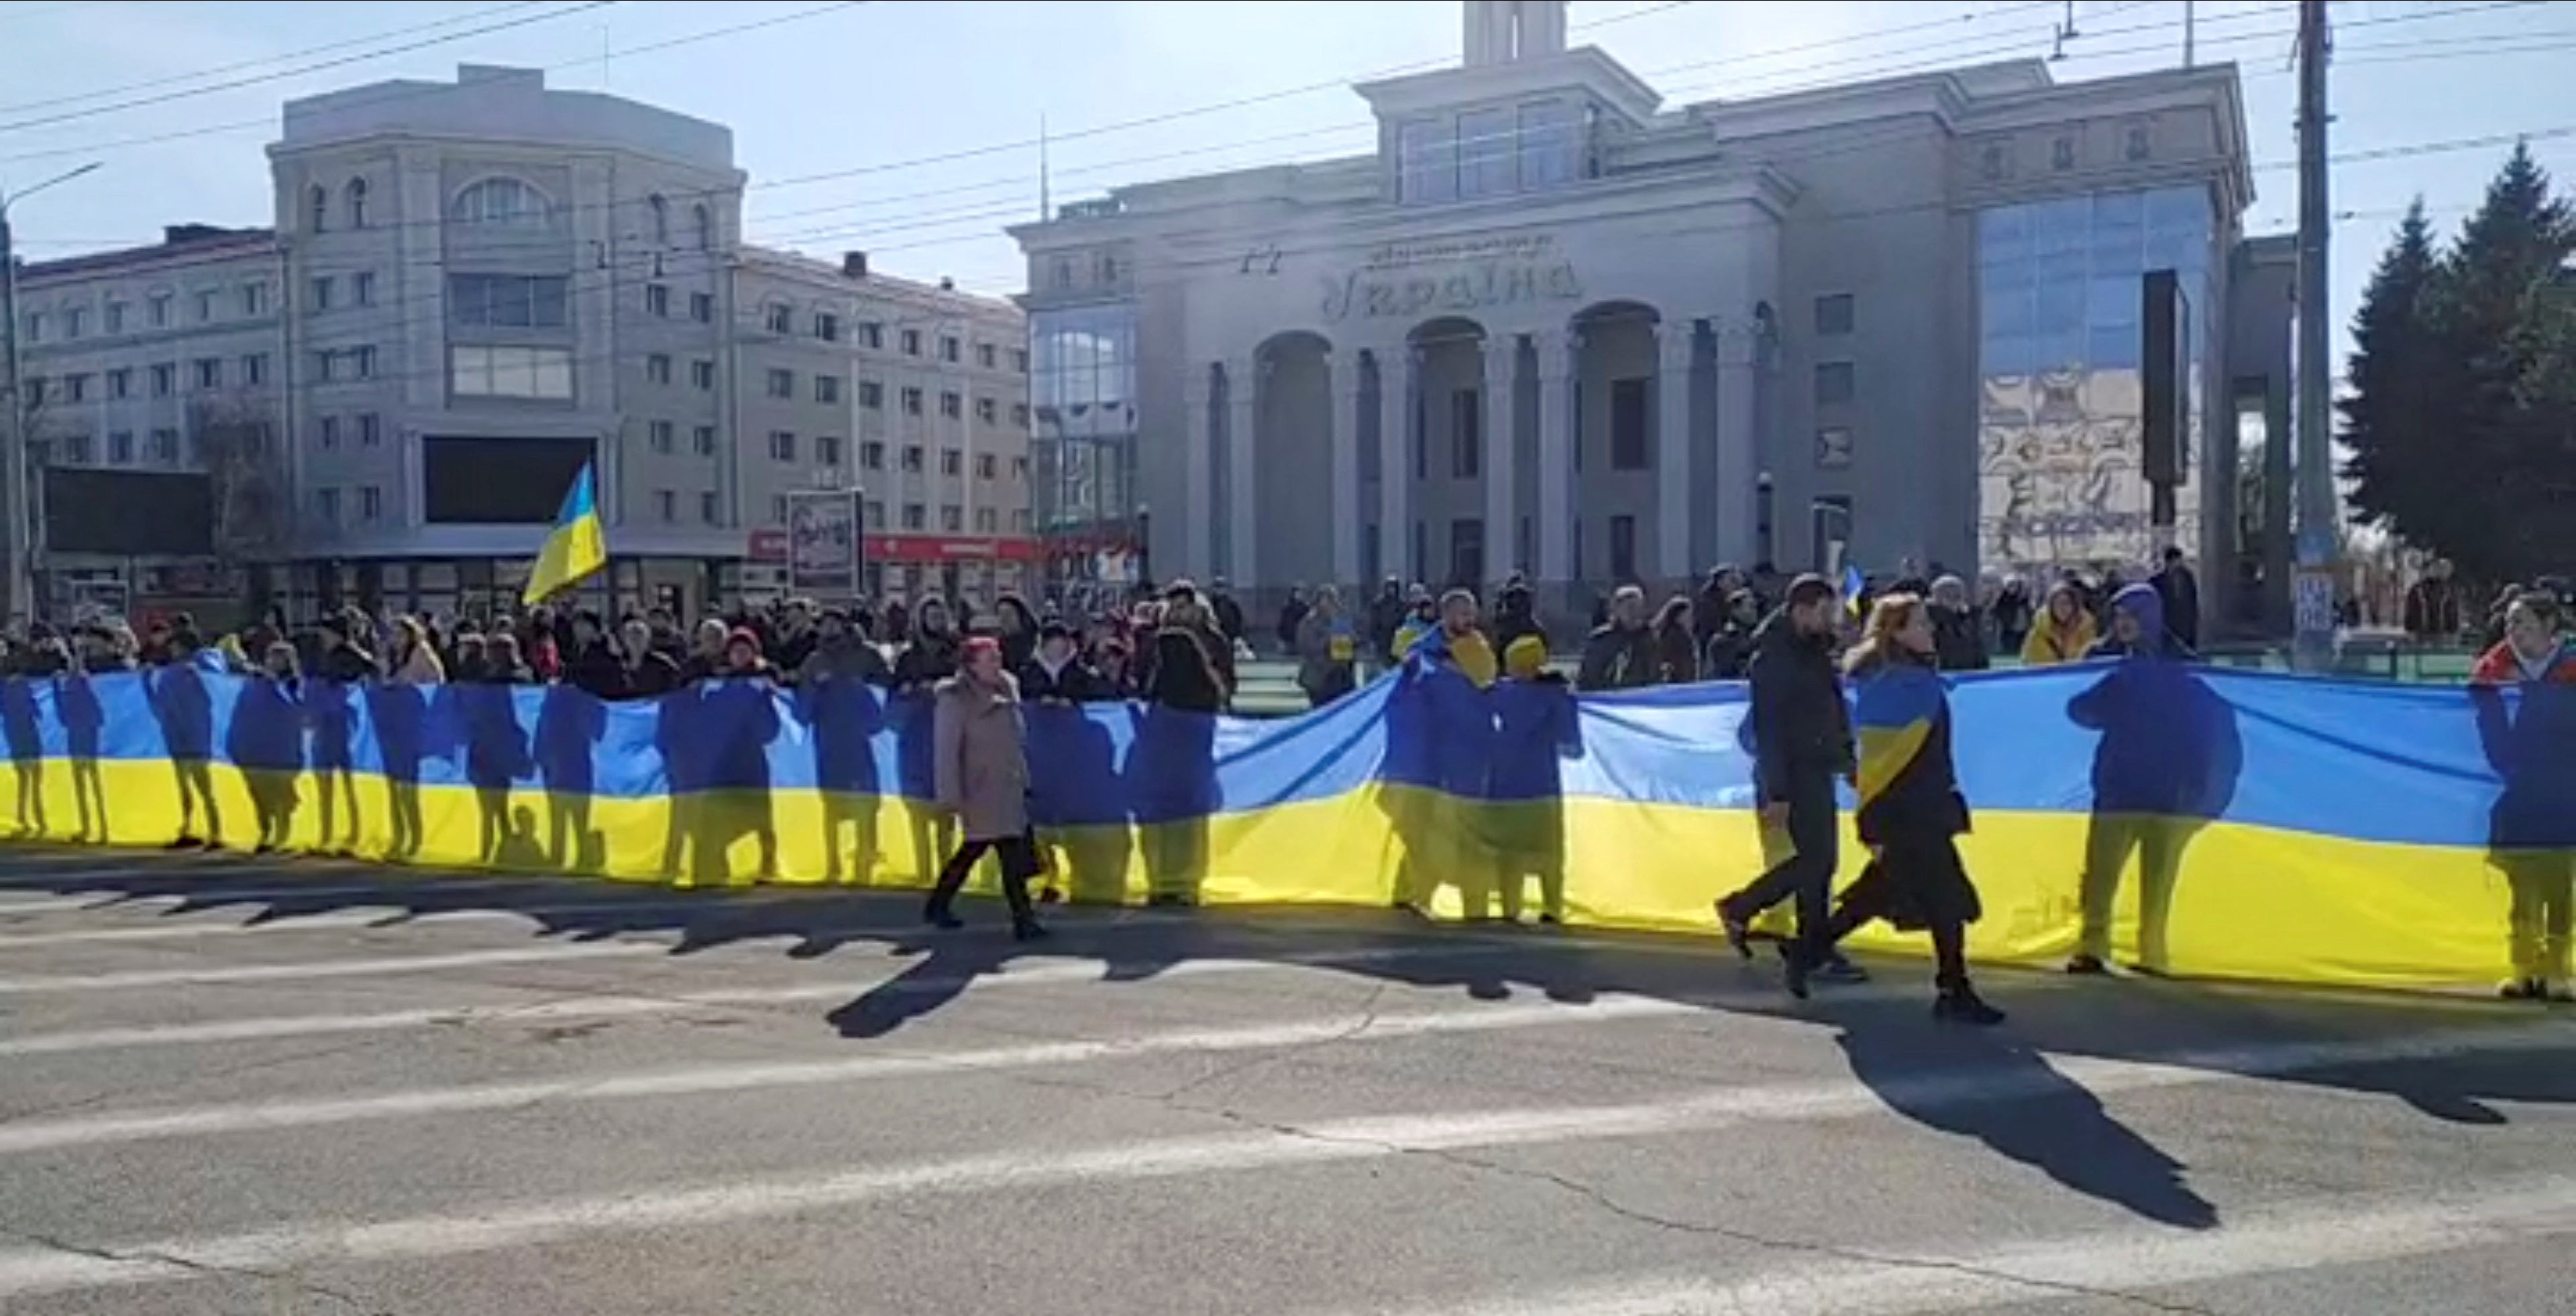 Ukrainians protest in the Russian-controlled city of Kherson, Ukraine, on 13 March, 2022.